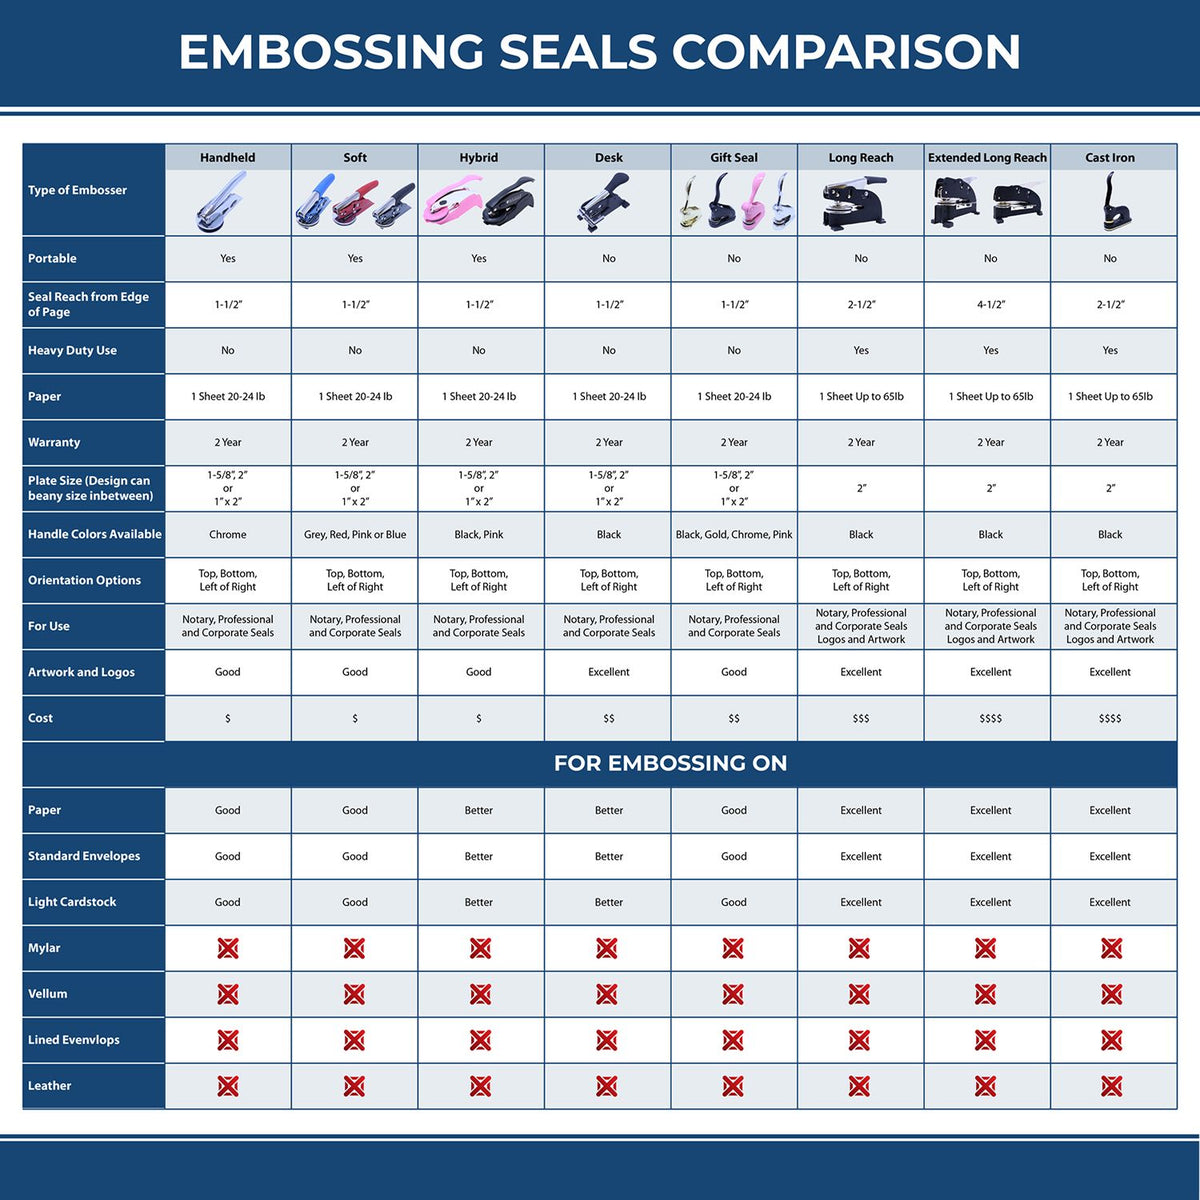 A comparison chart for the different types of mount models available for the Hybrid Delaware Architect Seal